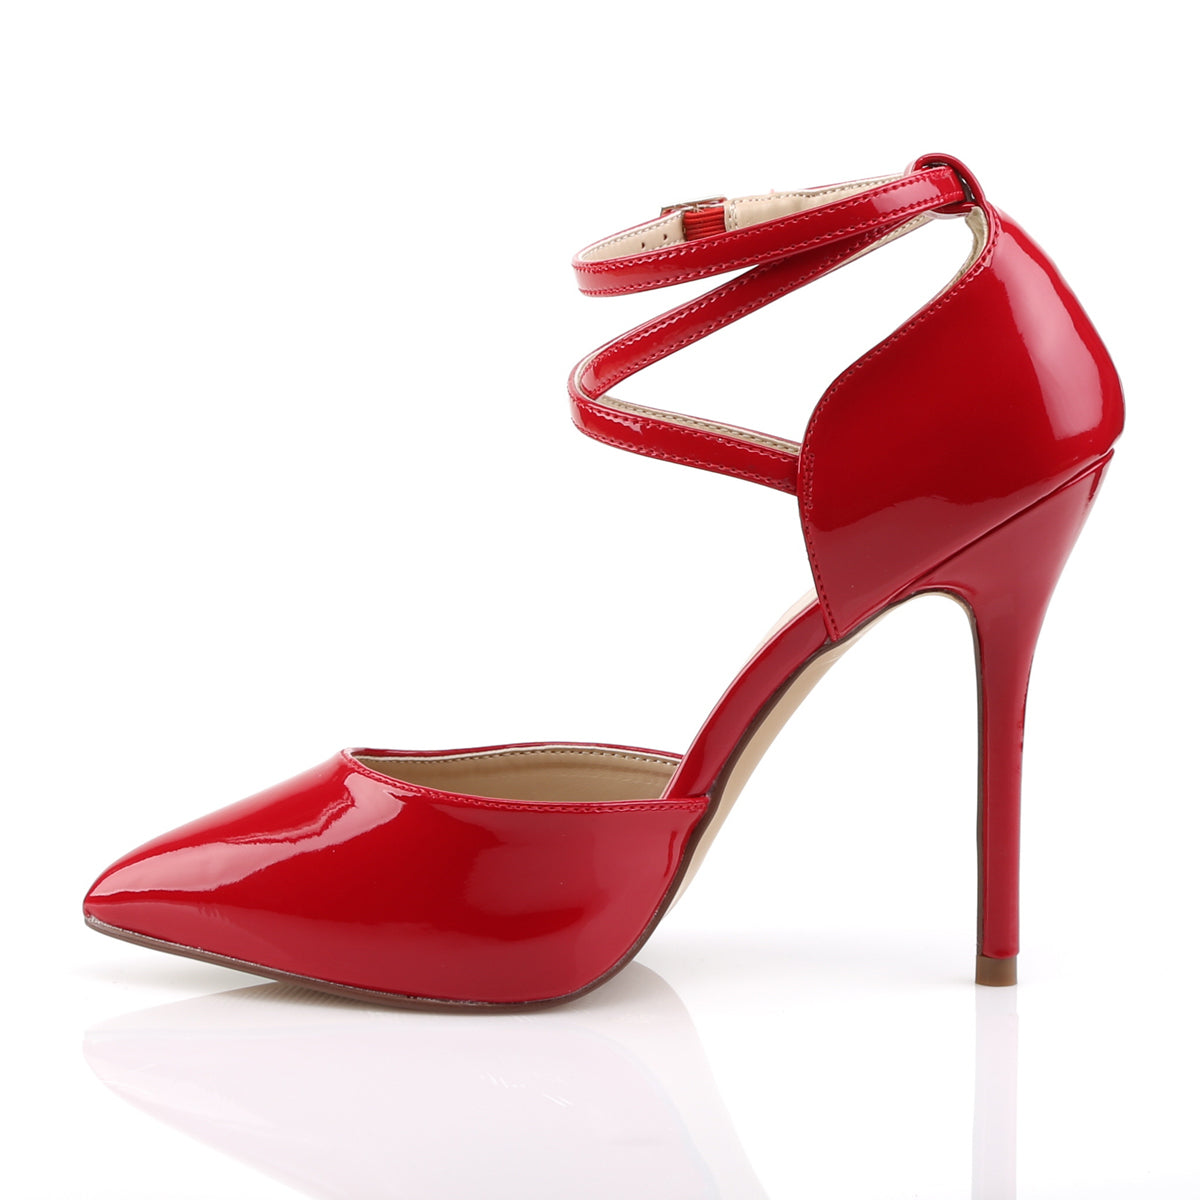 AMUSE-25 Pleaser Sexy 5 Inch Heel Red Fetish Footwear-Pleaser- Sexy Shoes Pole Dance Heels